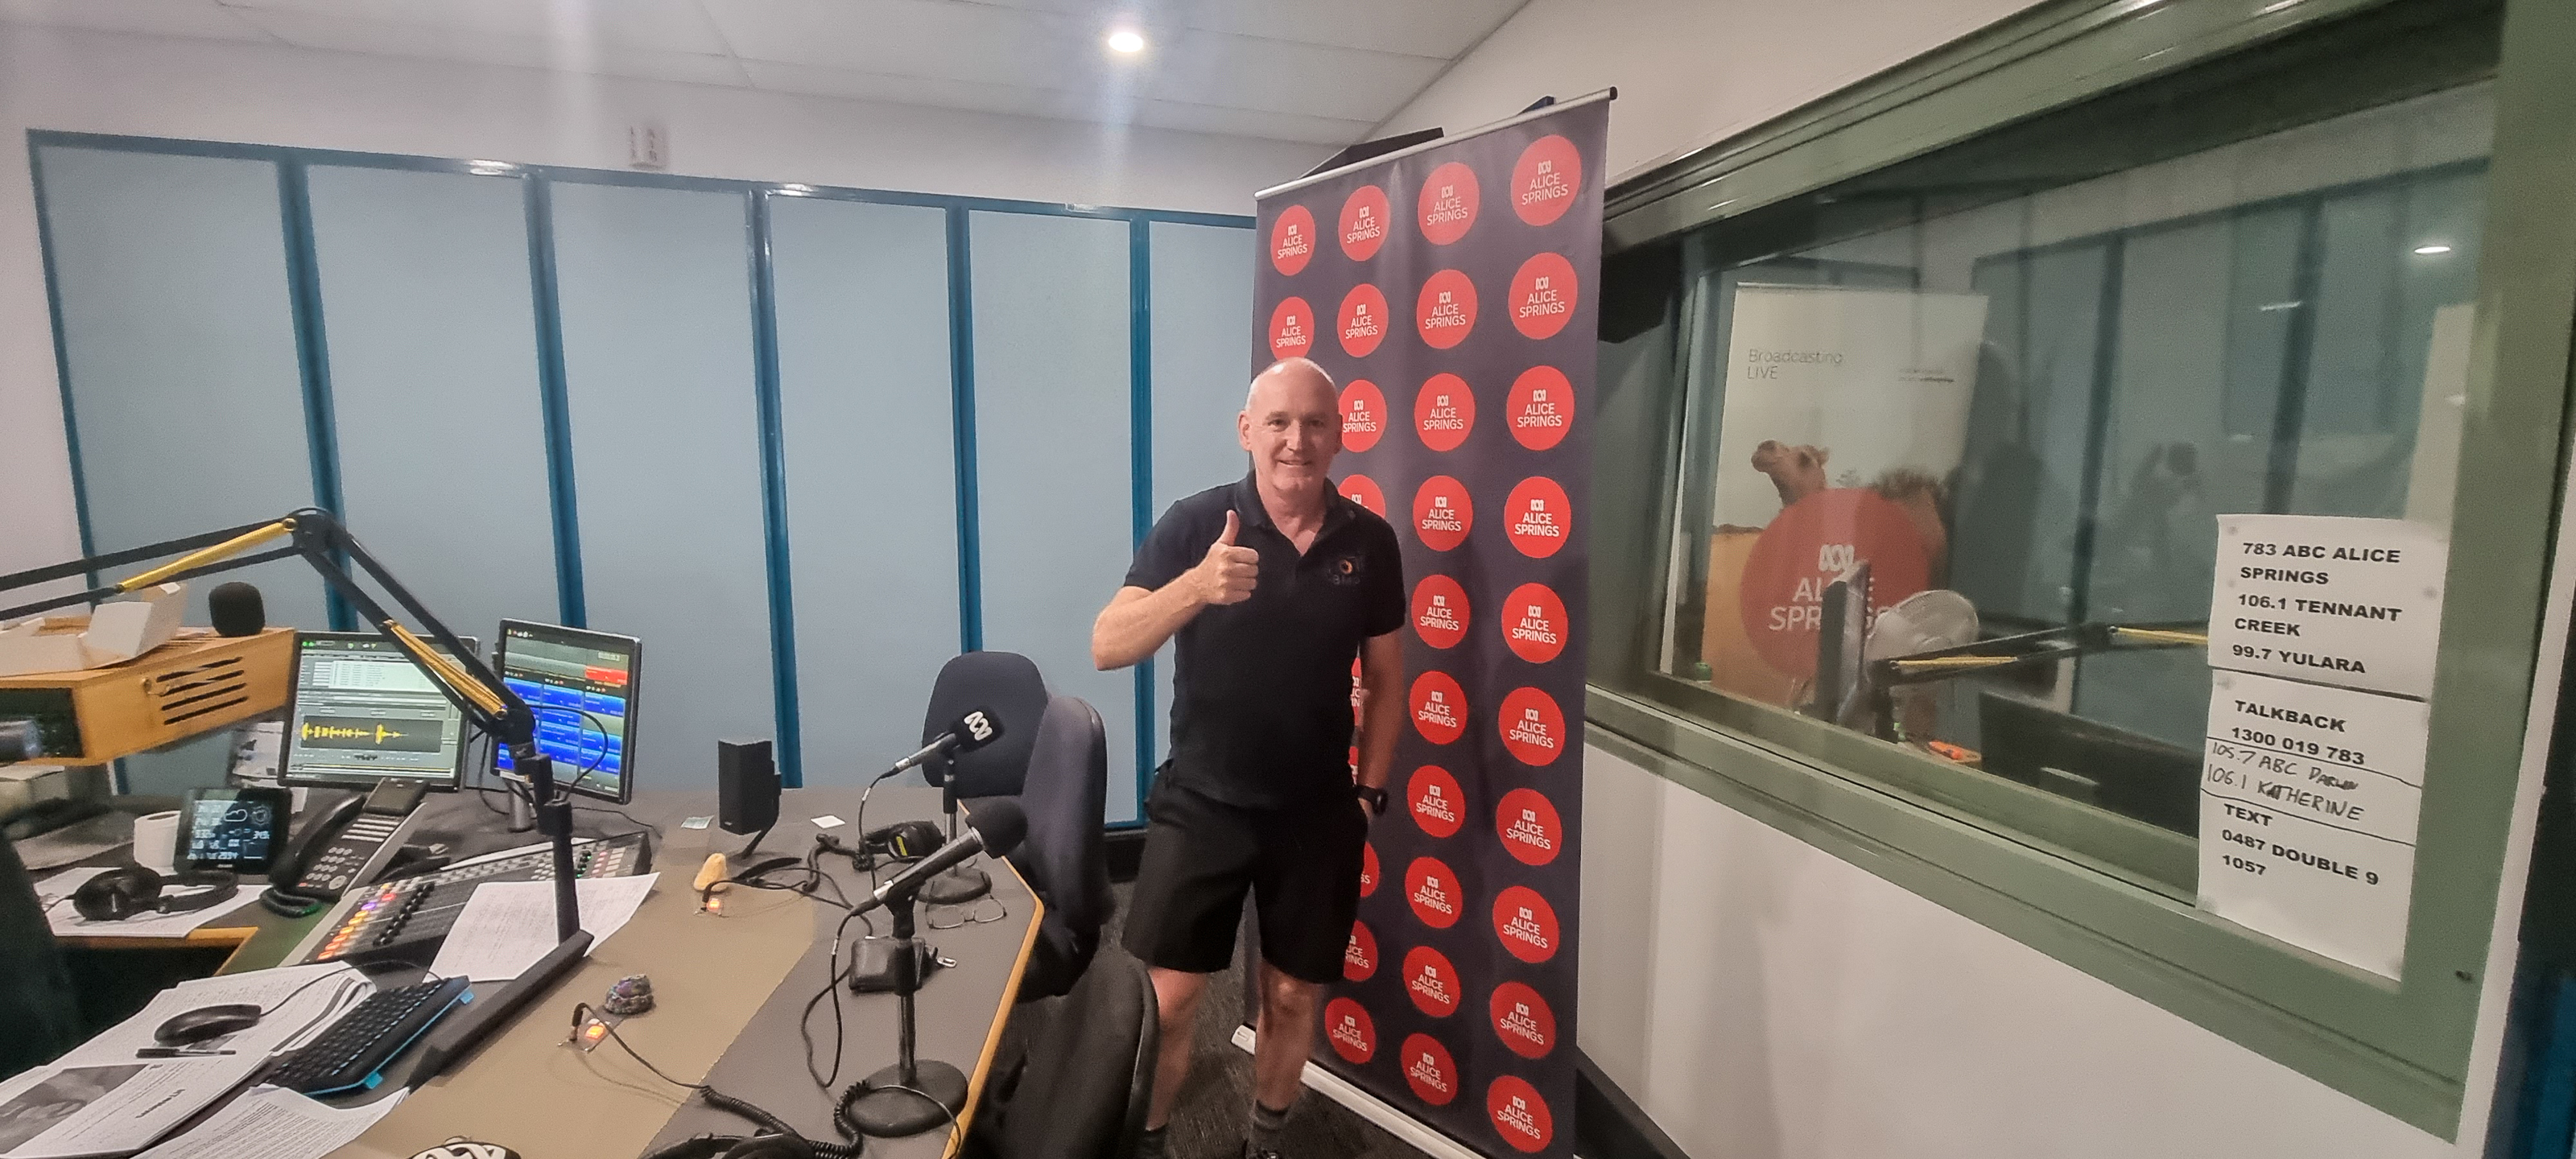 Brendan Maunder at the ABC radio station in Alice Springs giving an interview about free photographic workshops he is putting on for the local community